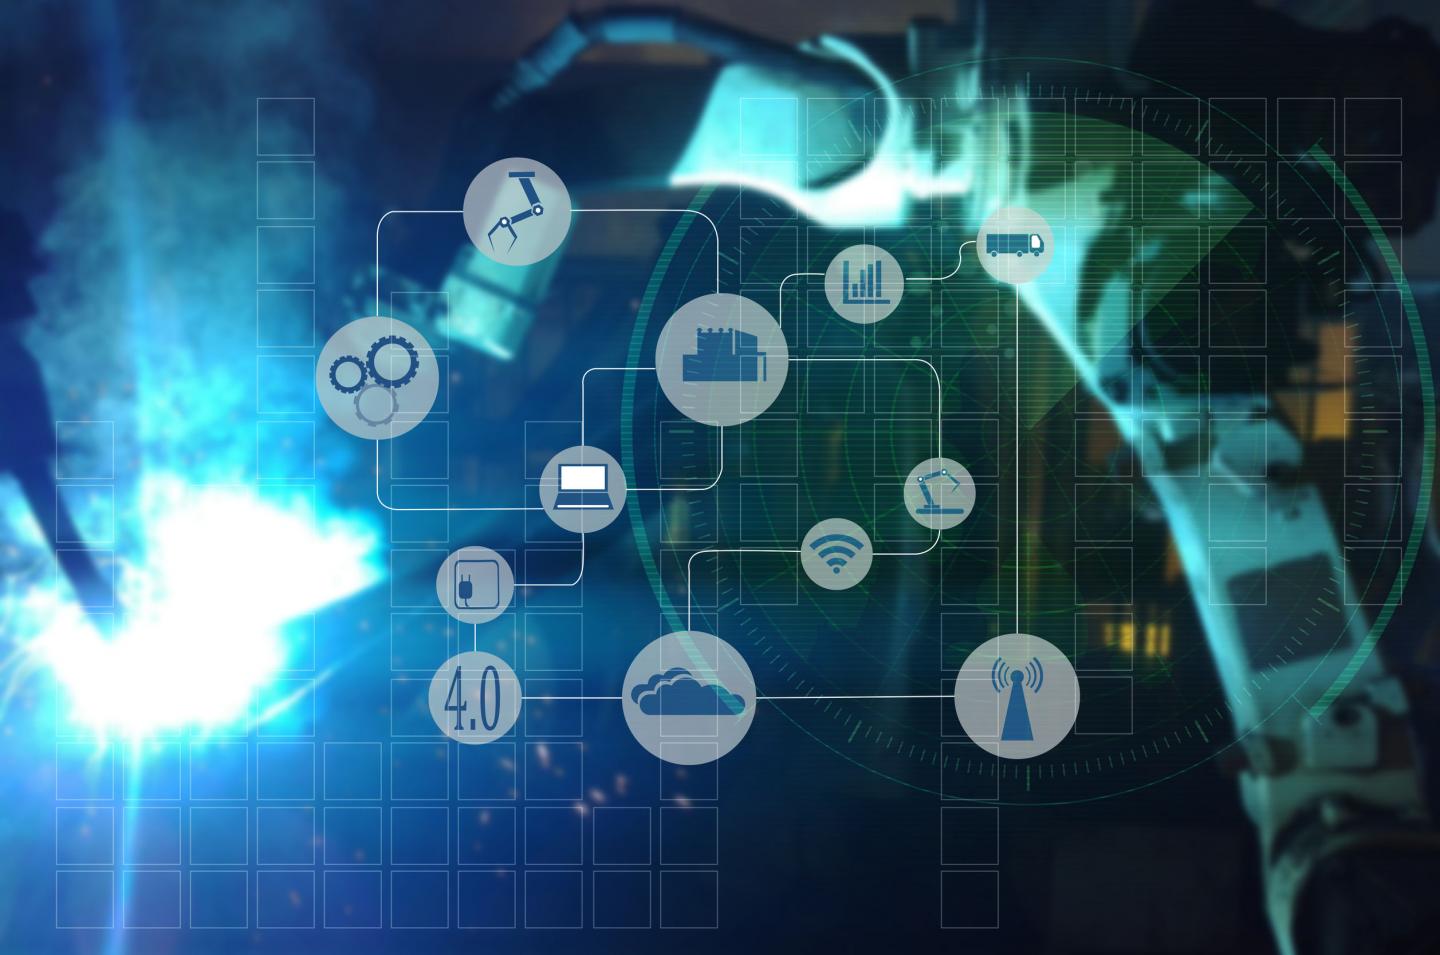 New software services aligned with Industry 4.0